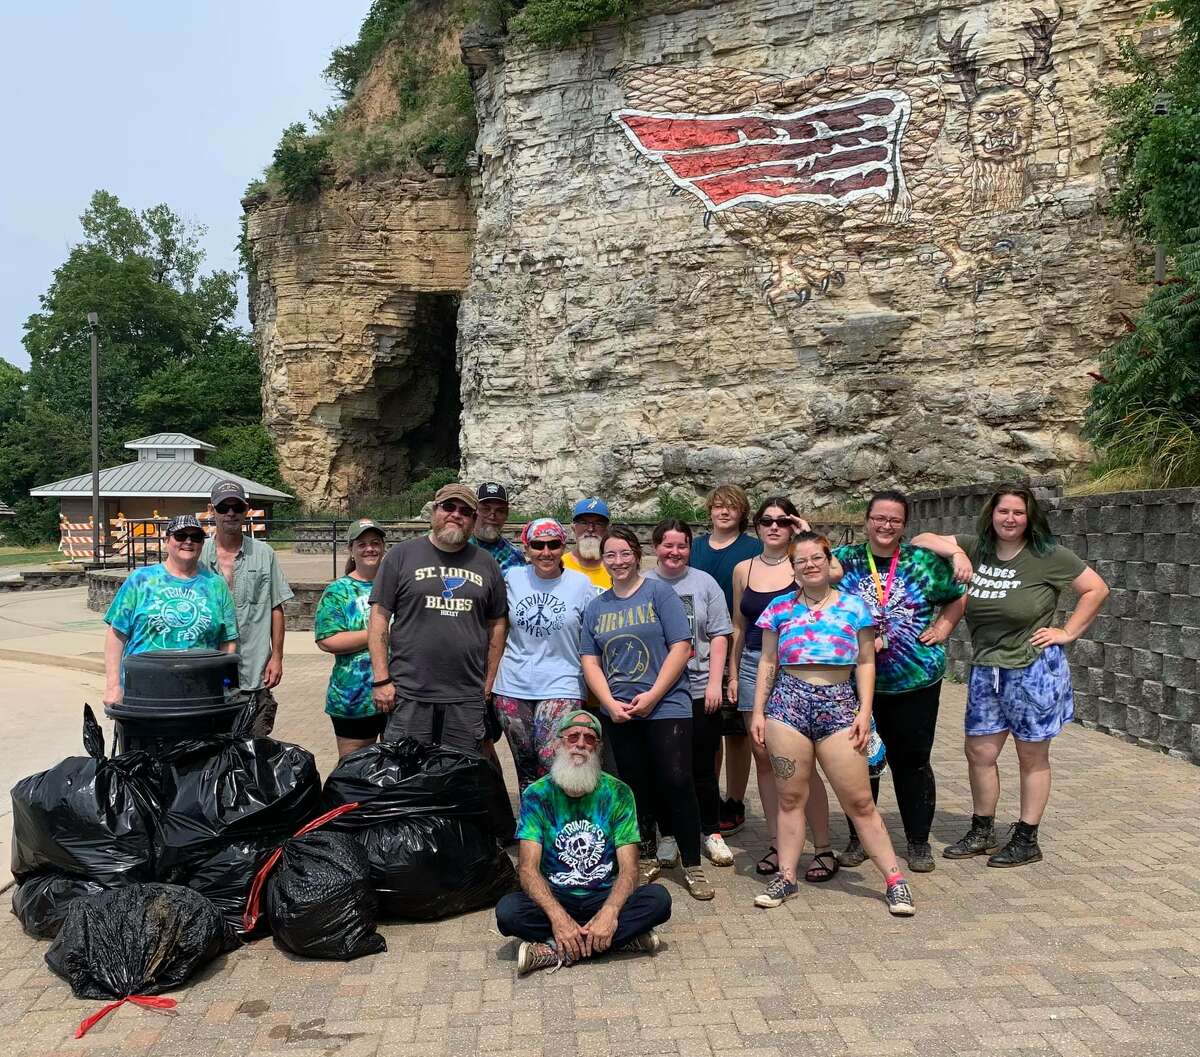 Members of Trinity's Way, a nonprofit organization, will be cleaning up litter around Piasa Park at 3 p.m. Sunday, April 10.